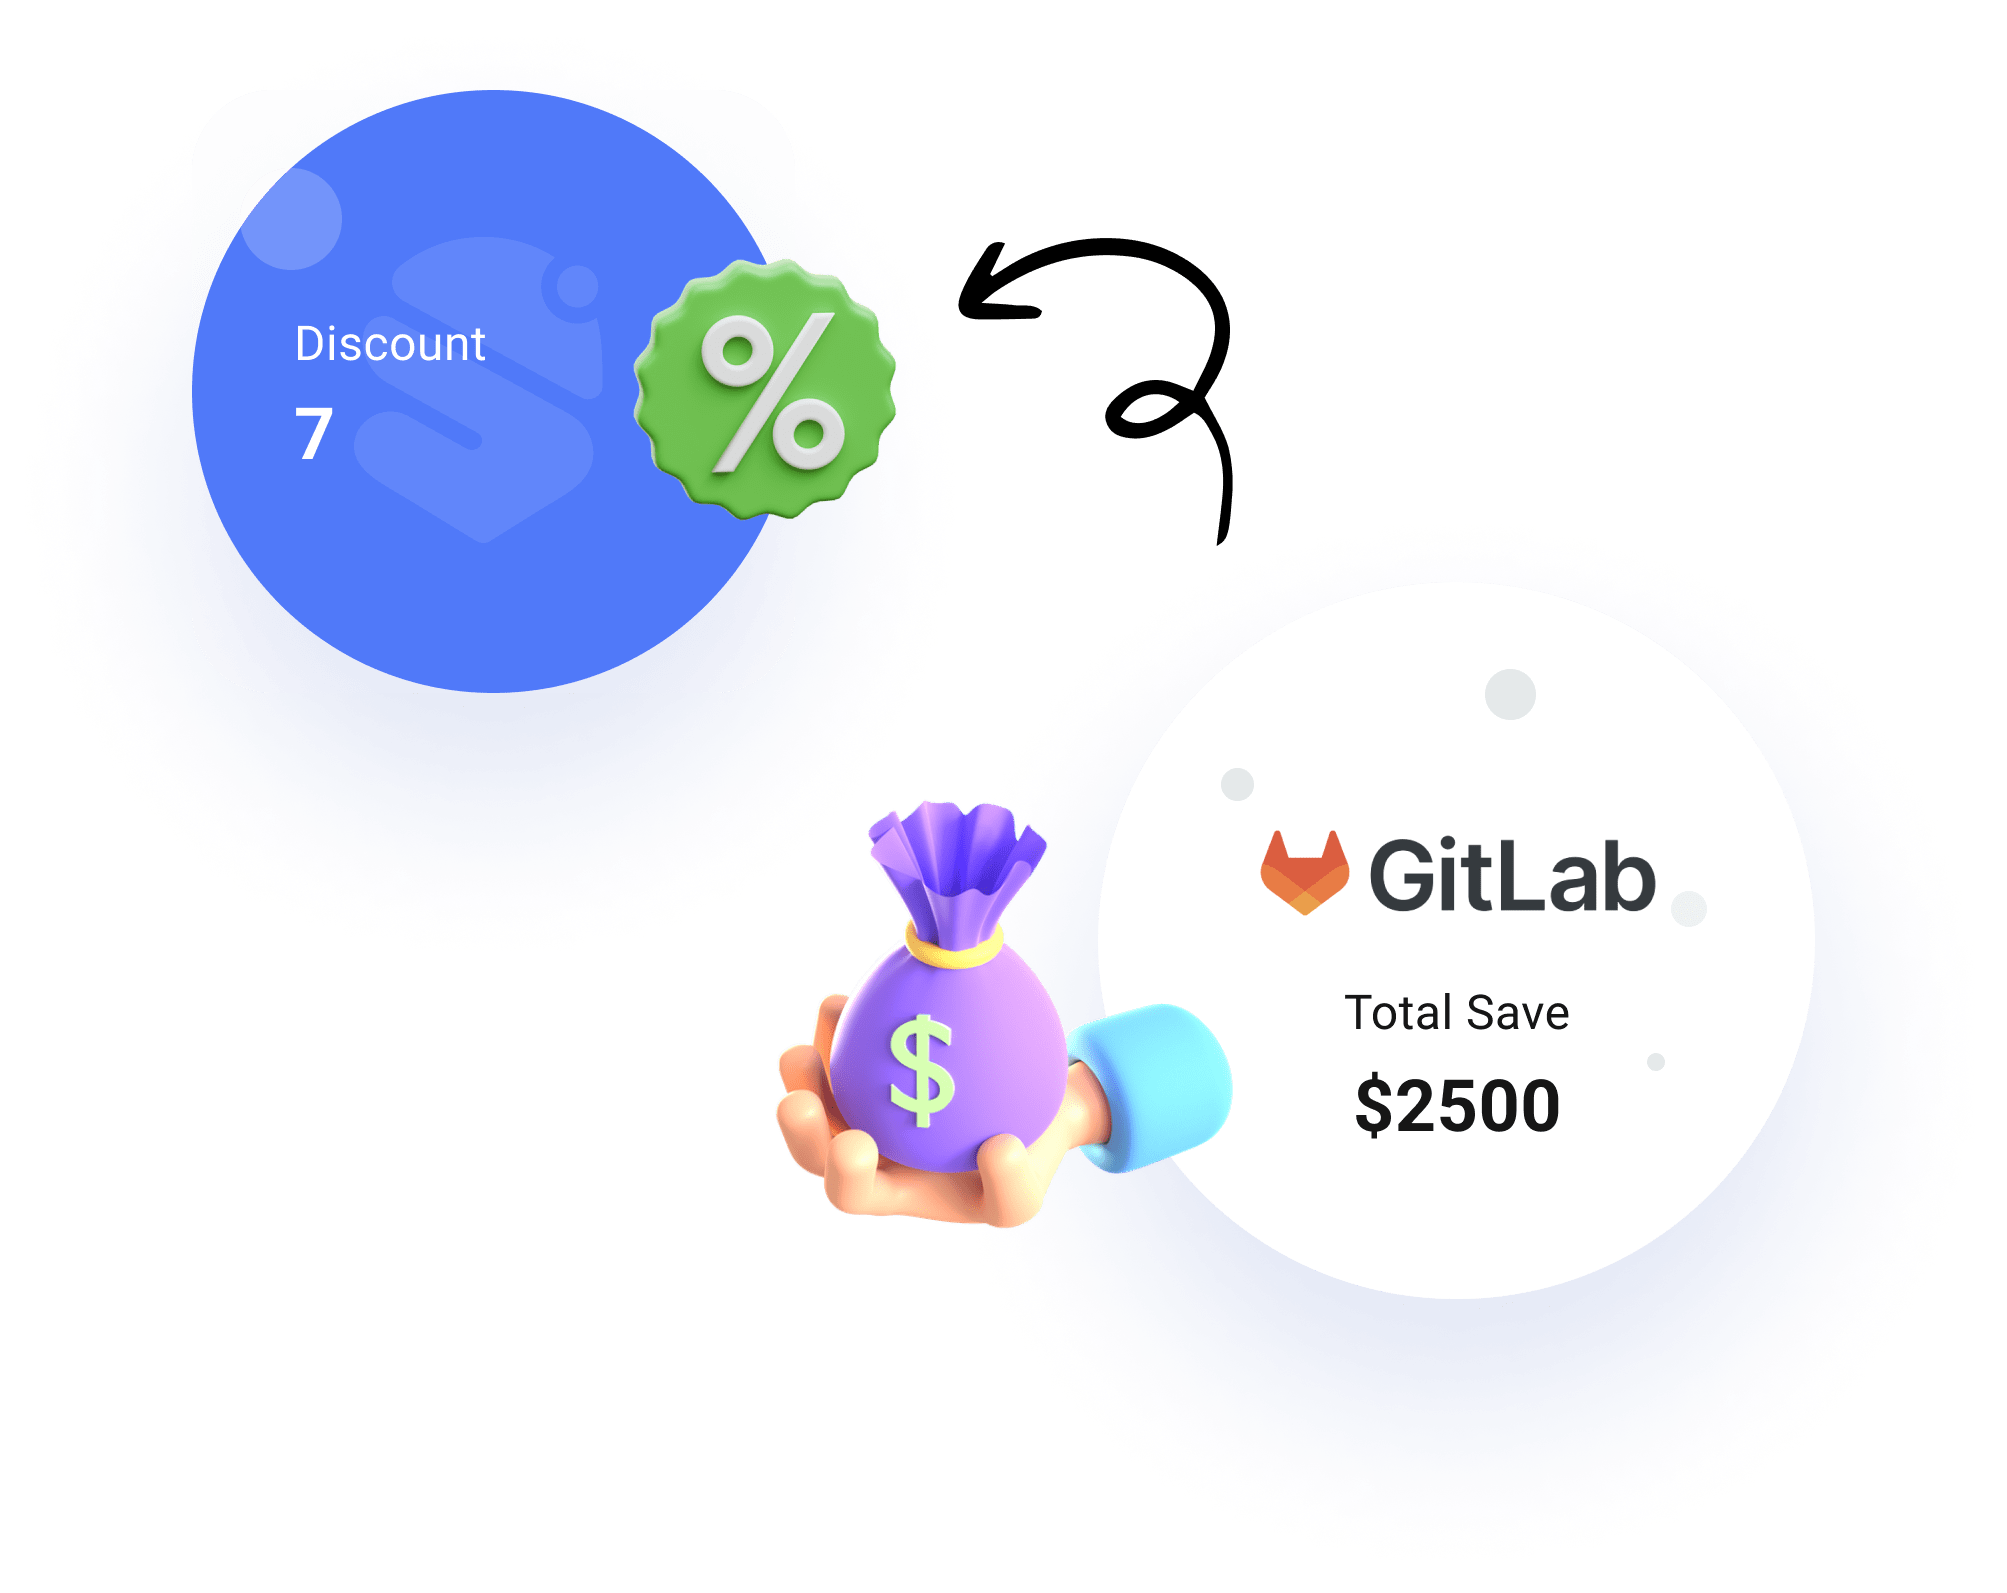 GitLab partnered with SubscriptionPro